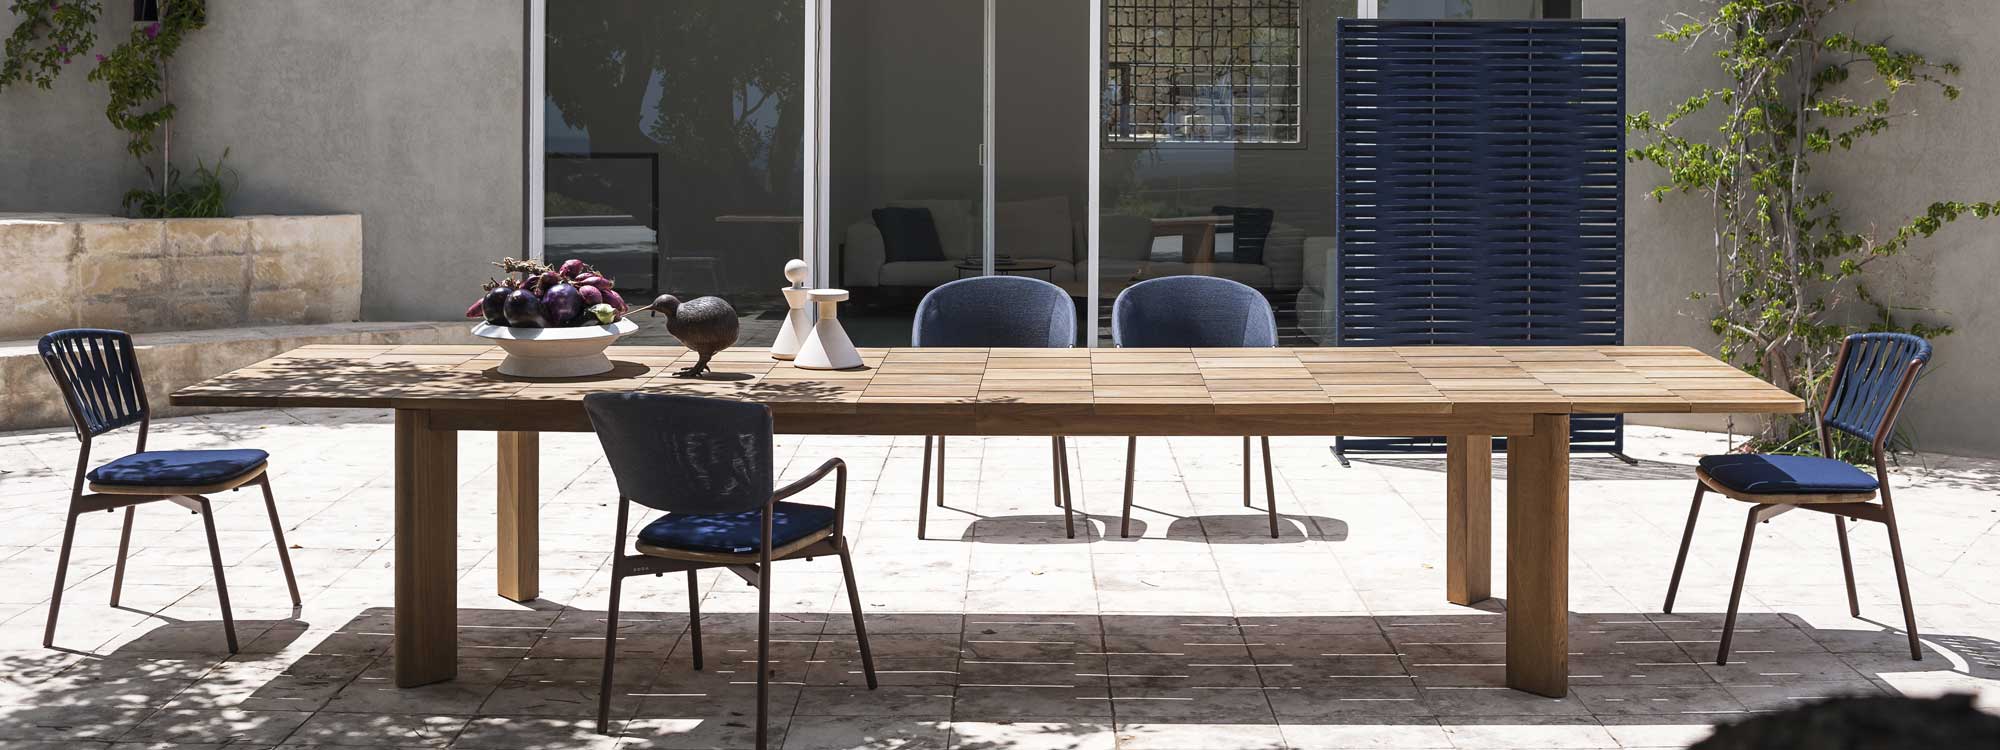 Image of Brick extending teak garden table with Piper chairs and Wing outdoor screen in light and shade of sunny modern terrace